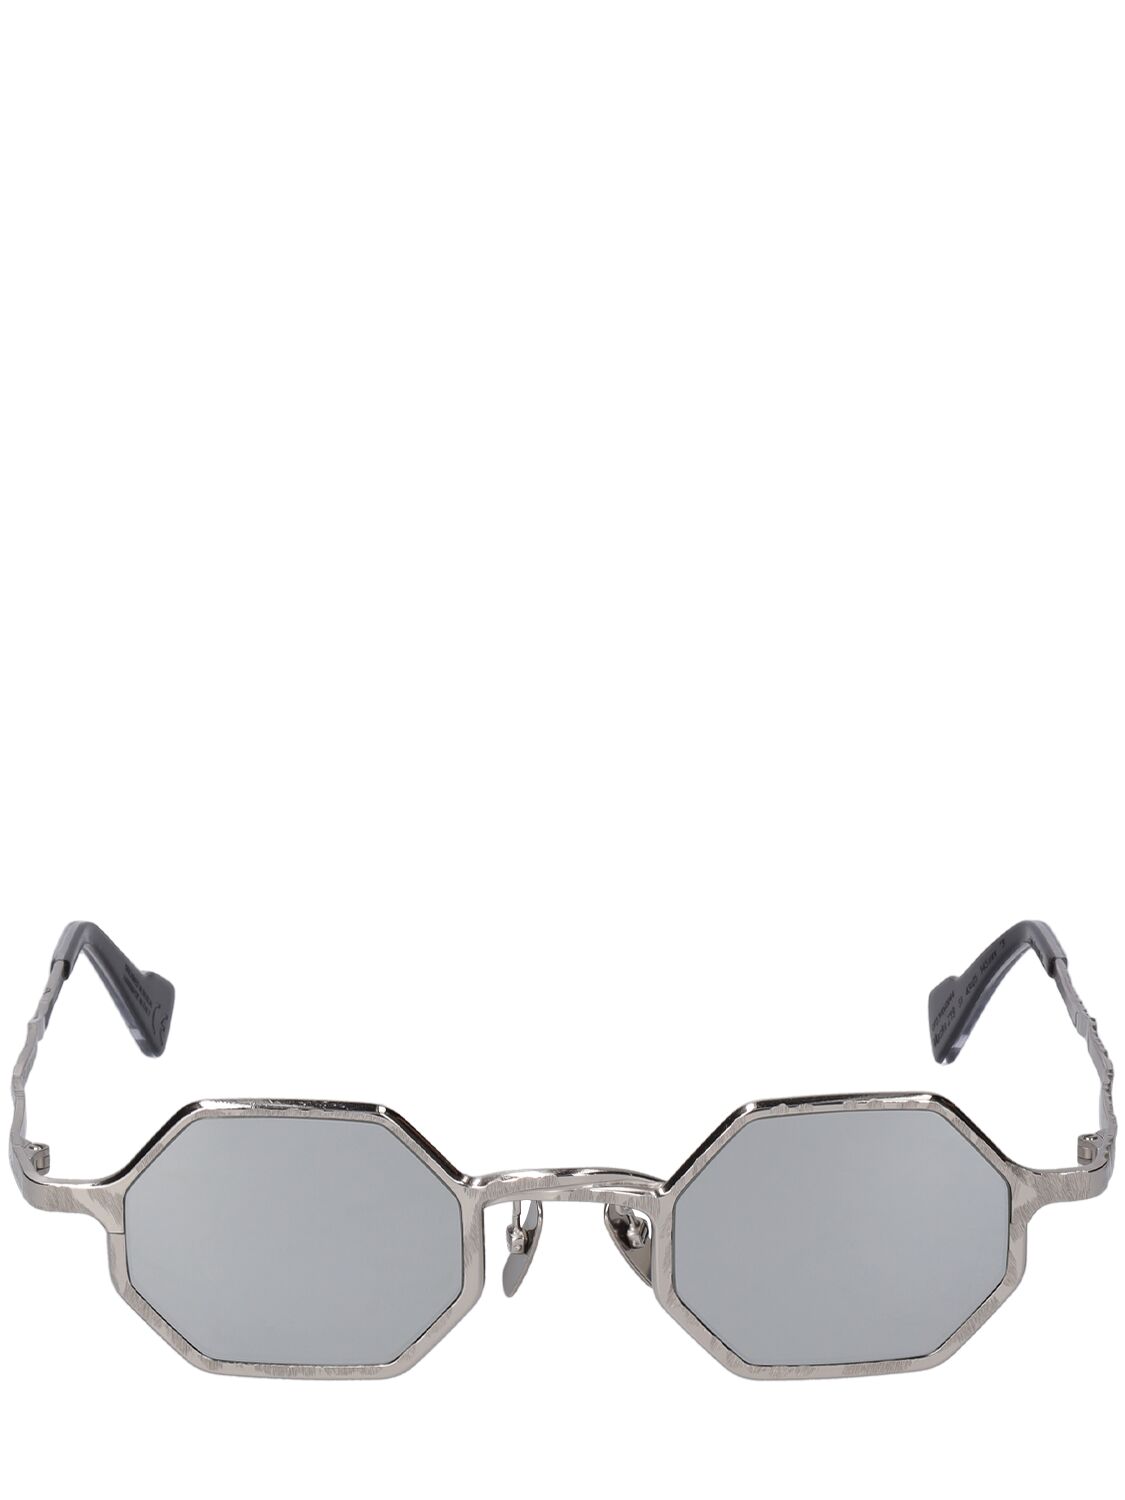 Image of Z19 Squared Metal Sunglasses